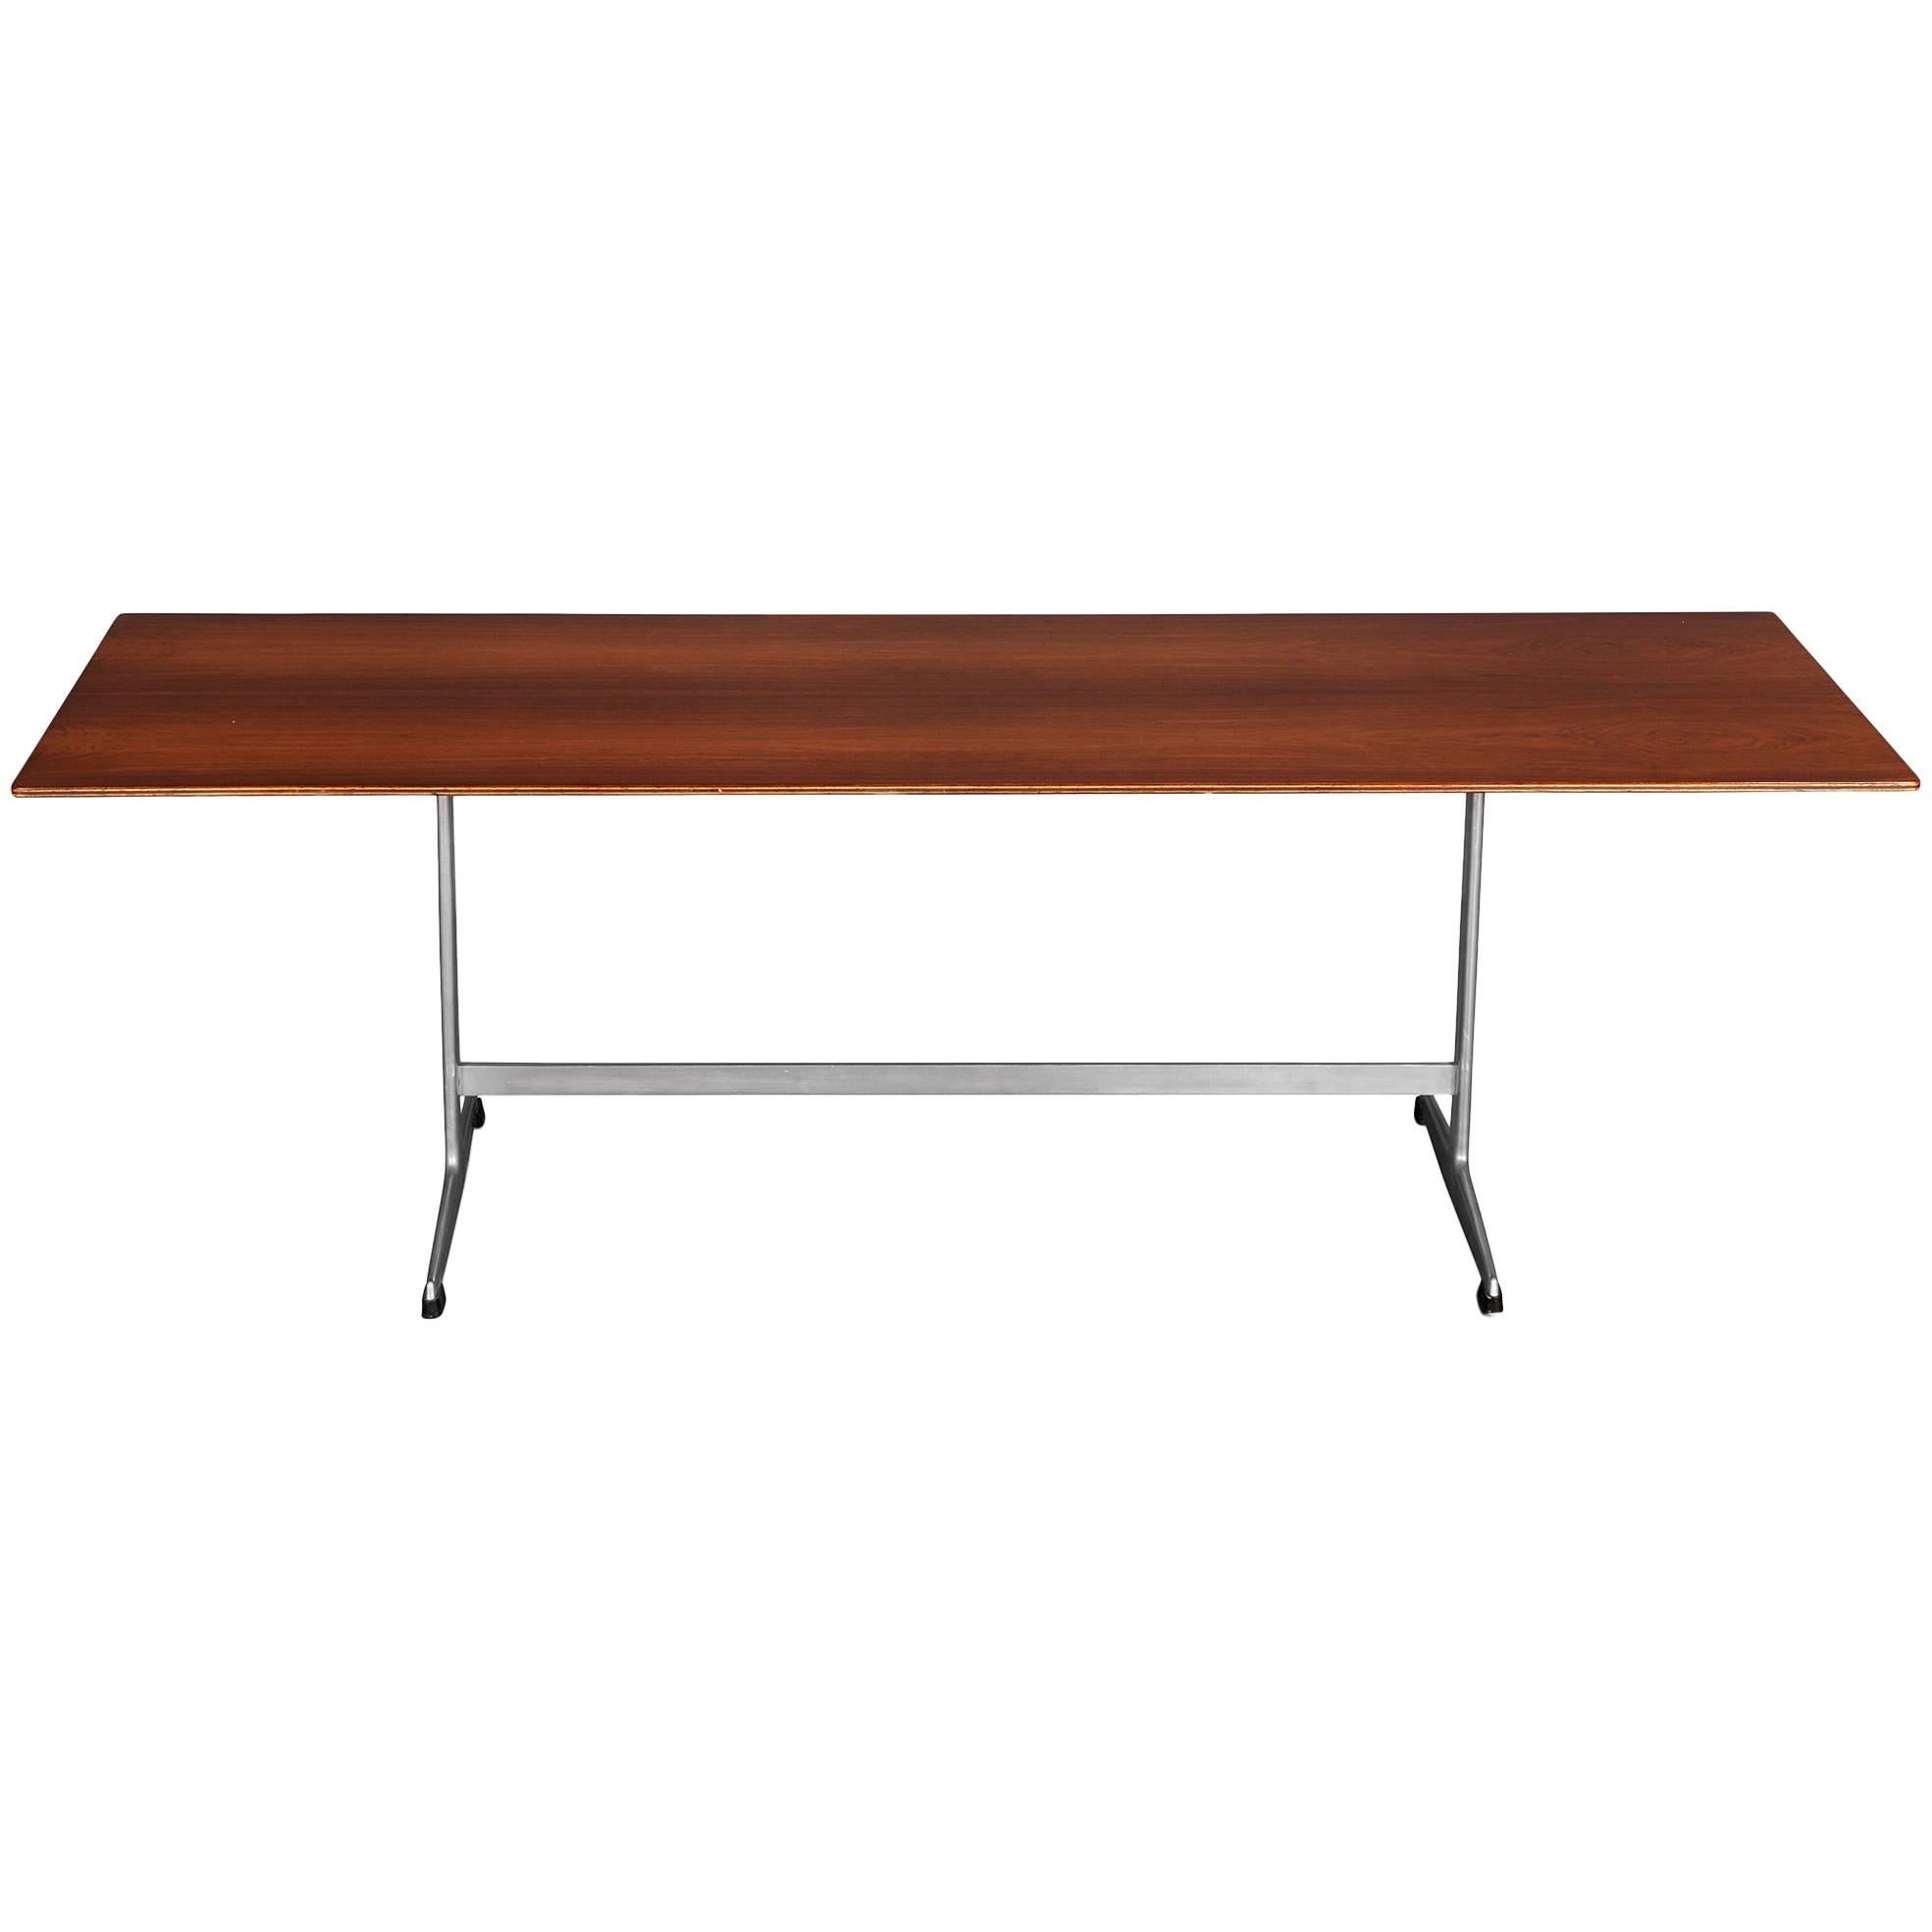 Shaker Table by Arne Jacobsen for the SAS Royal Hotel in 1958 For Sale